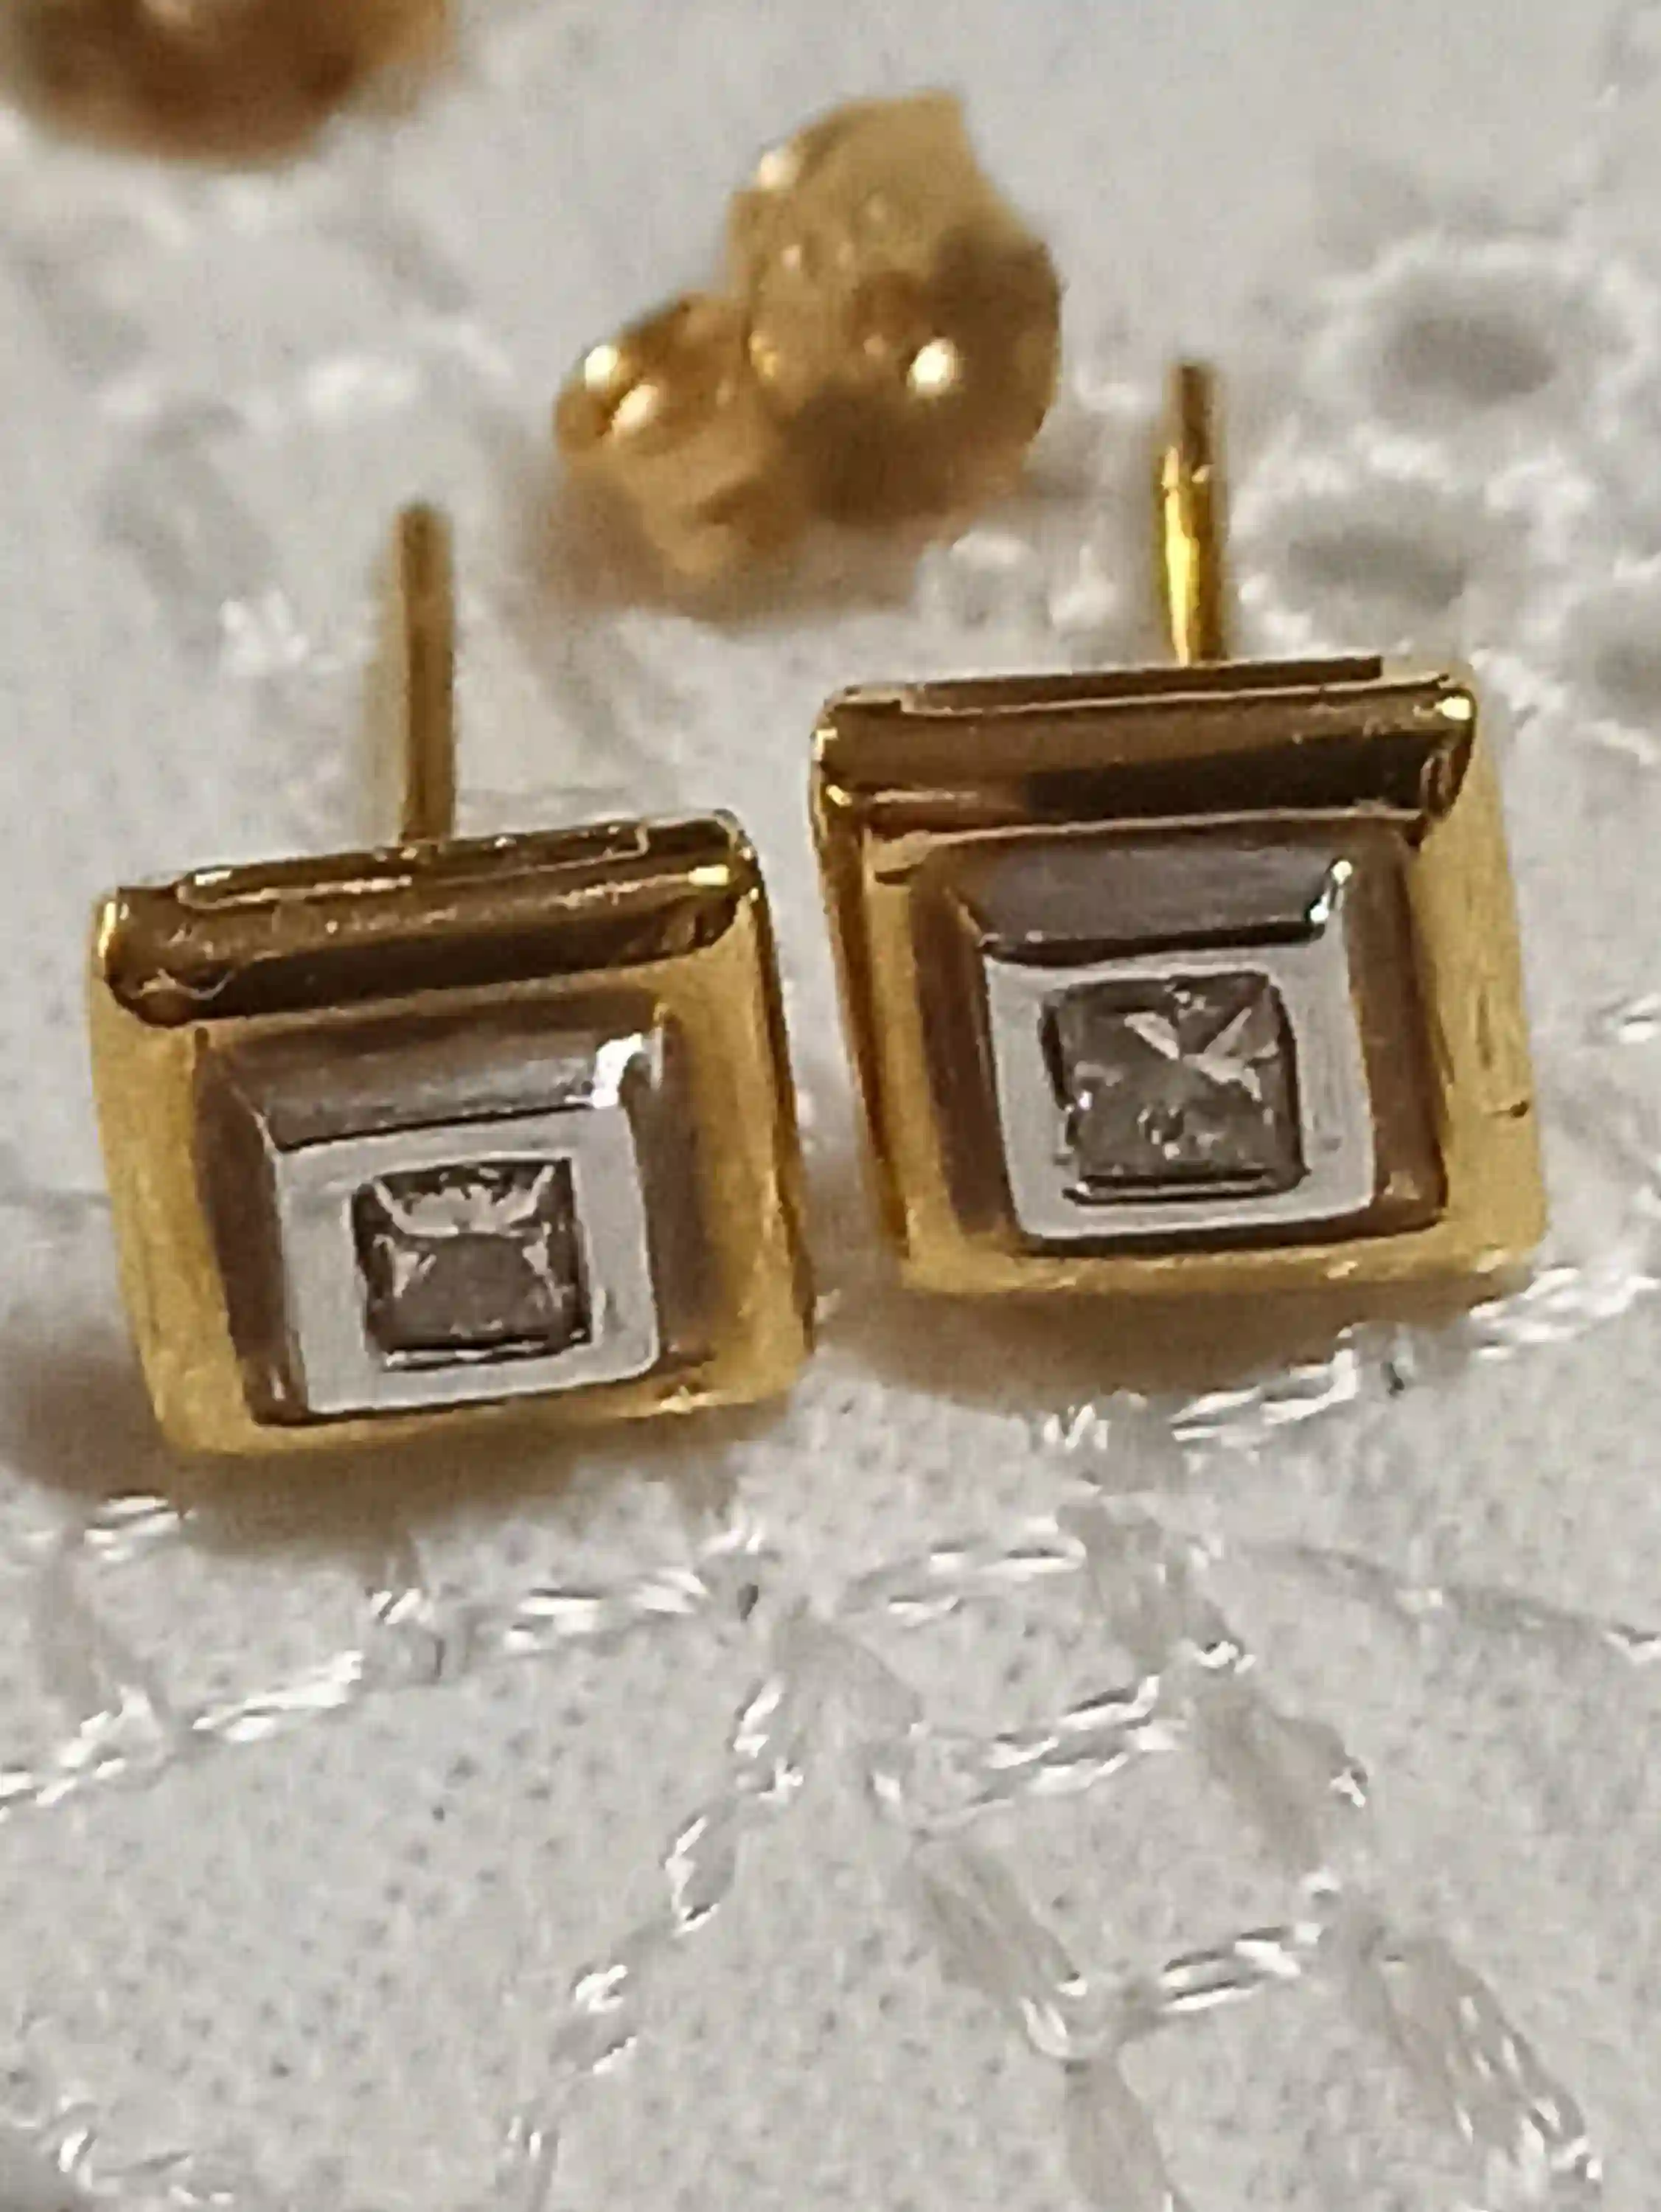 Diamond earrings solid 18K gold Unique jewelry gift /GENUINE diamond earrings HAND made /Real Diamond gold stud earrings Jewellery Handmade 